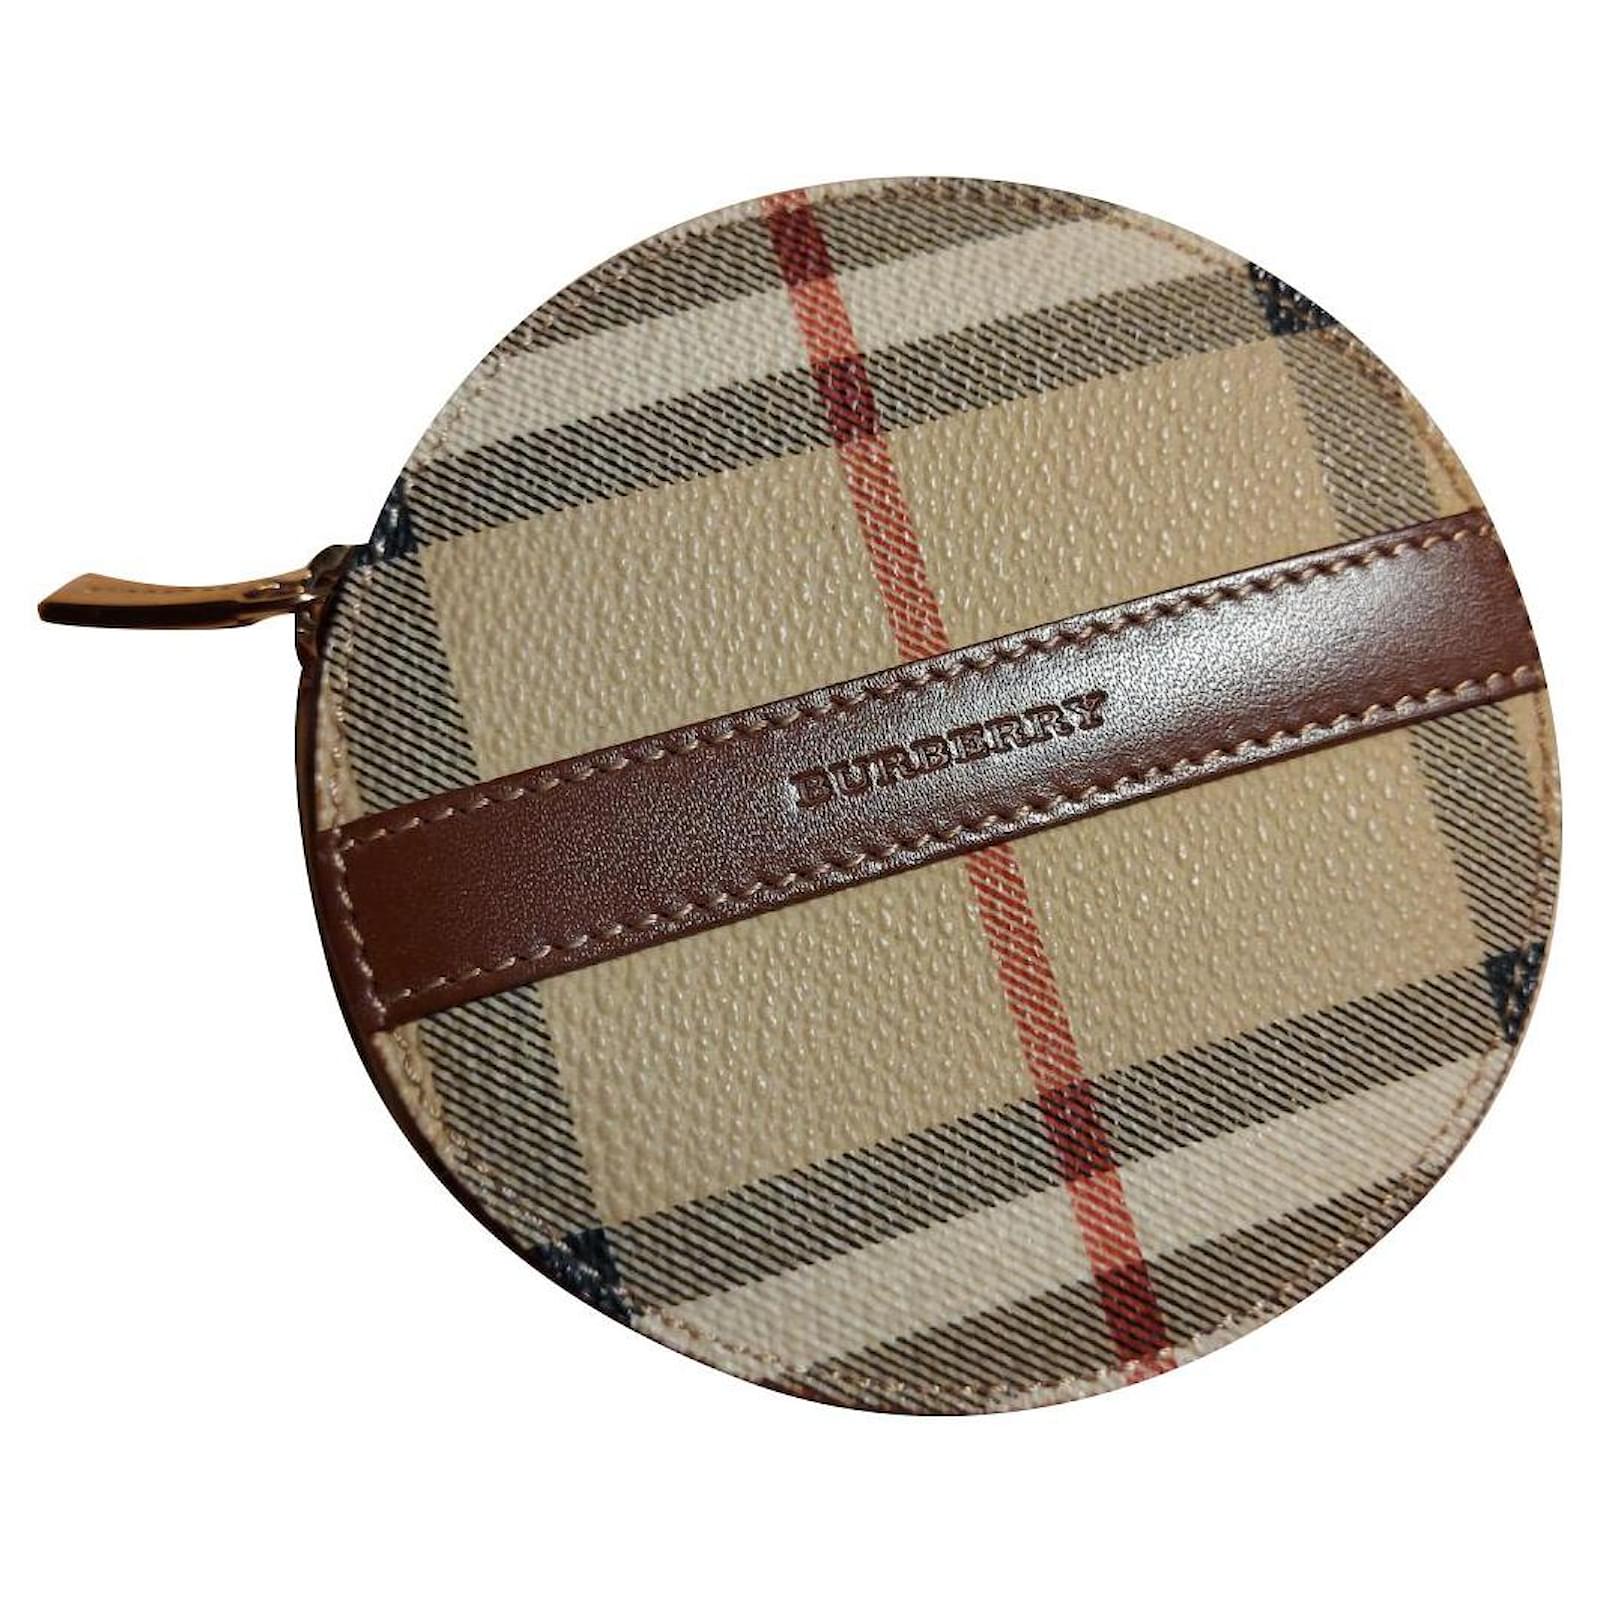 Burberry Coin Purse Wallet Brown Black White Multiple colors Beige Golden  Grey Dark red Yellow Sand